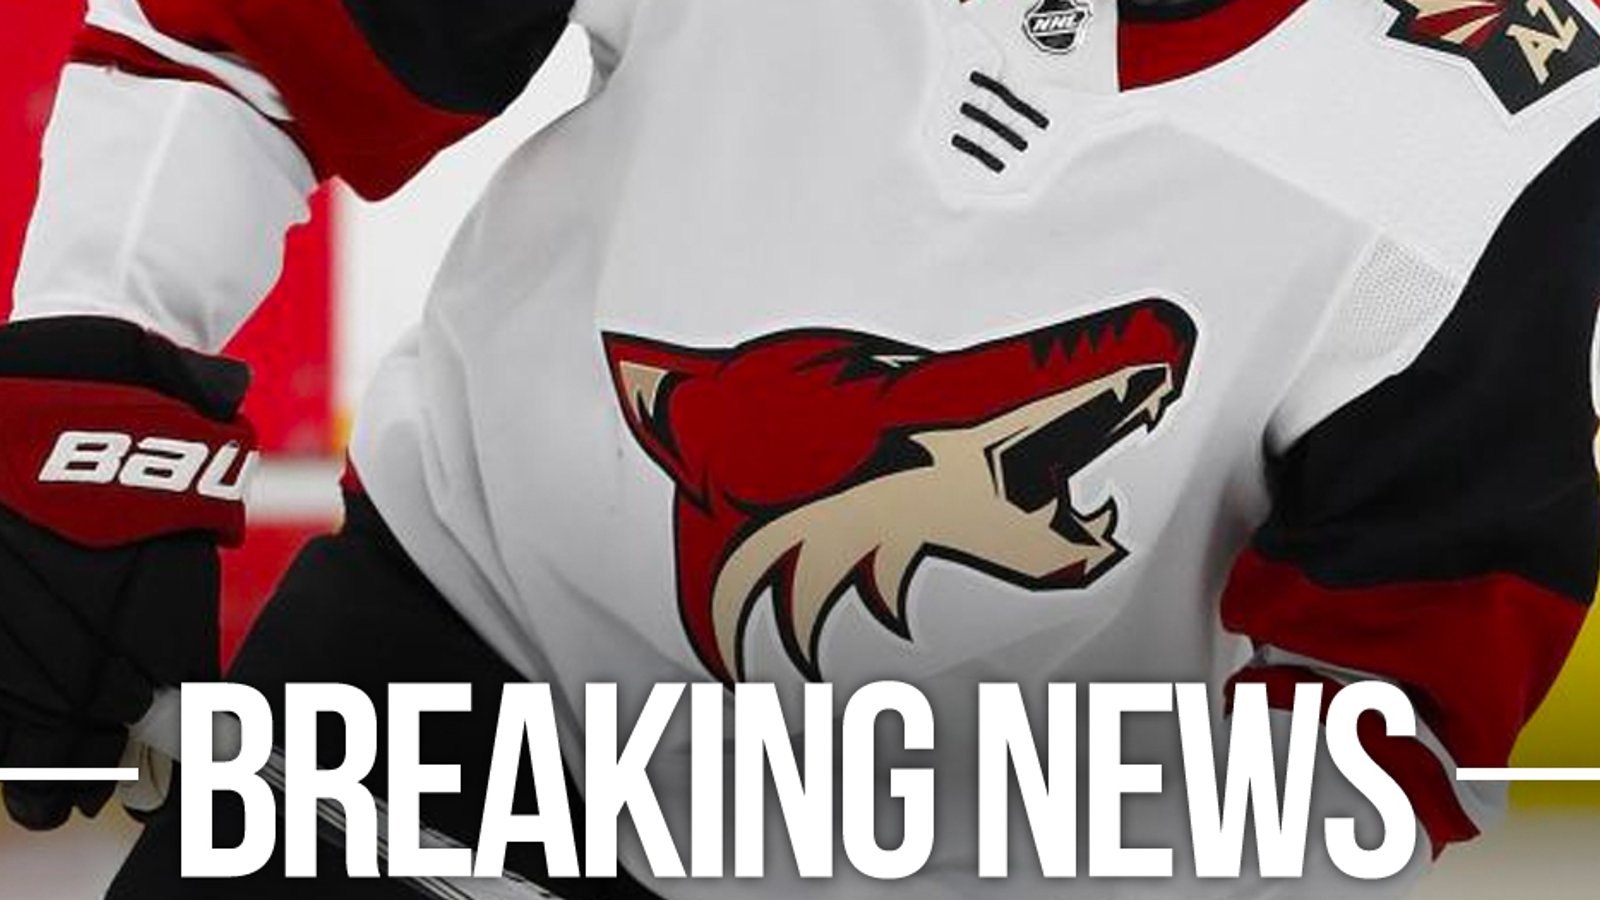 Investigation into Coyotes reveals major dysfunction and crippling financial woes